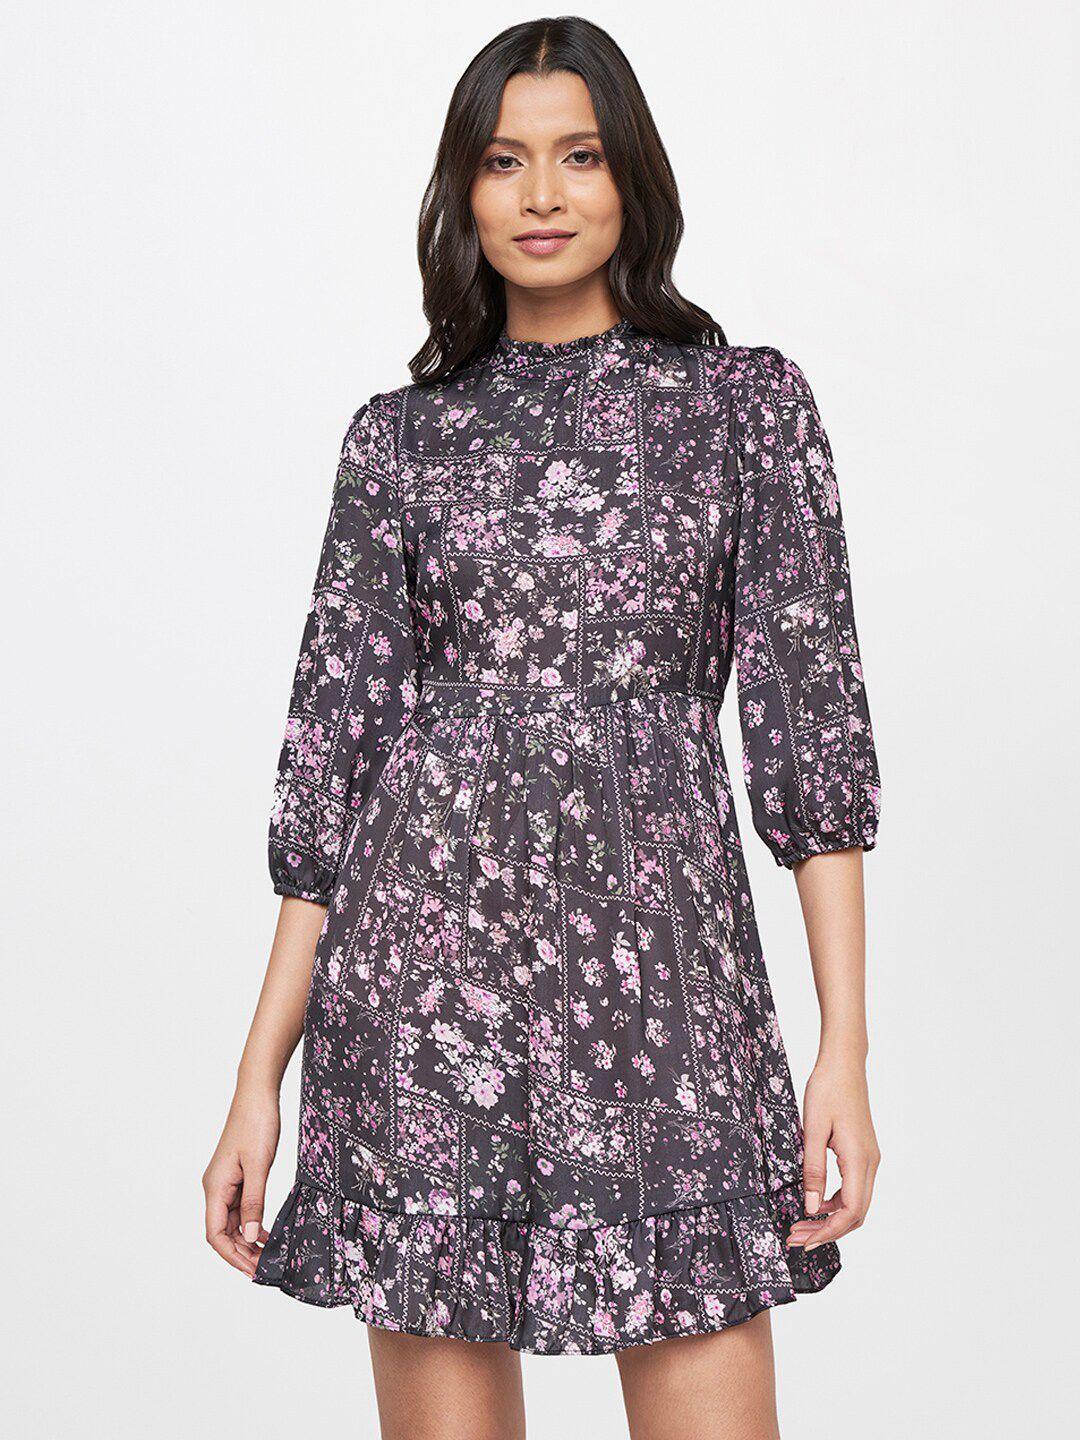 and-women-purple-&-pink-floral-fit-&-flare-dress